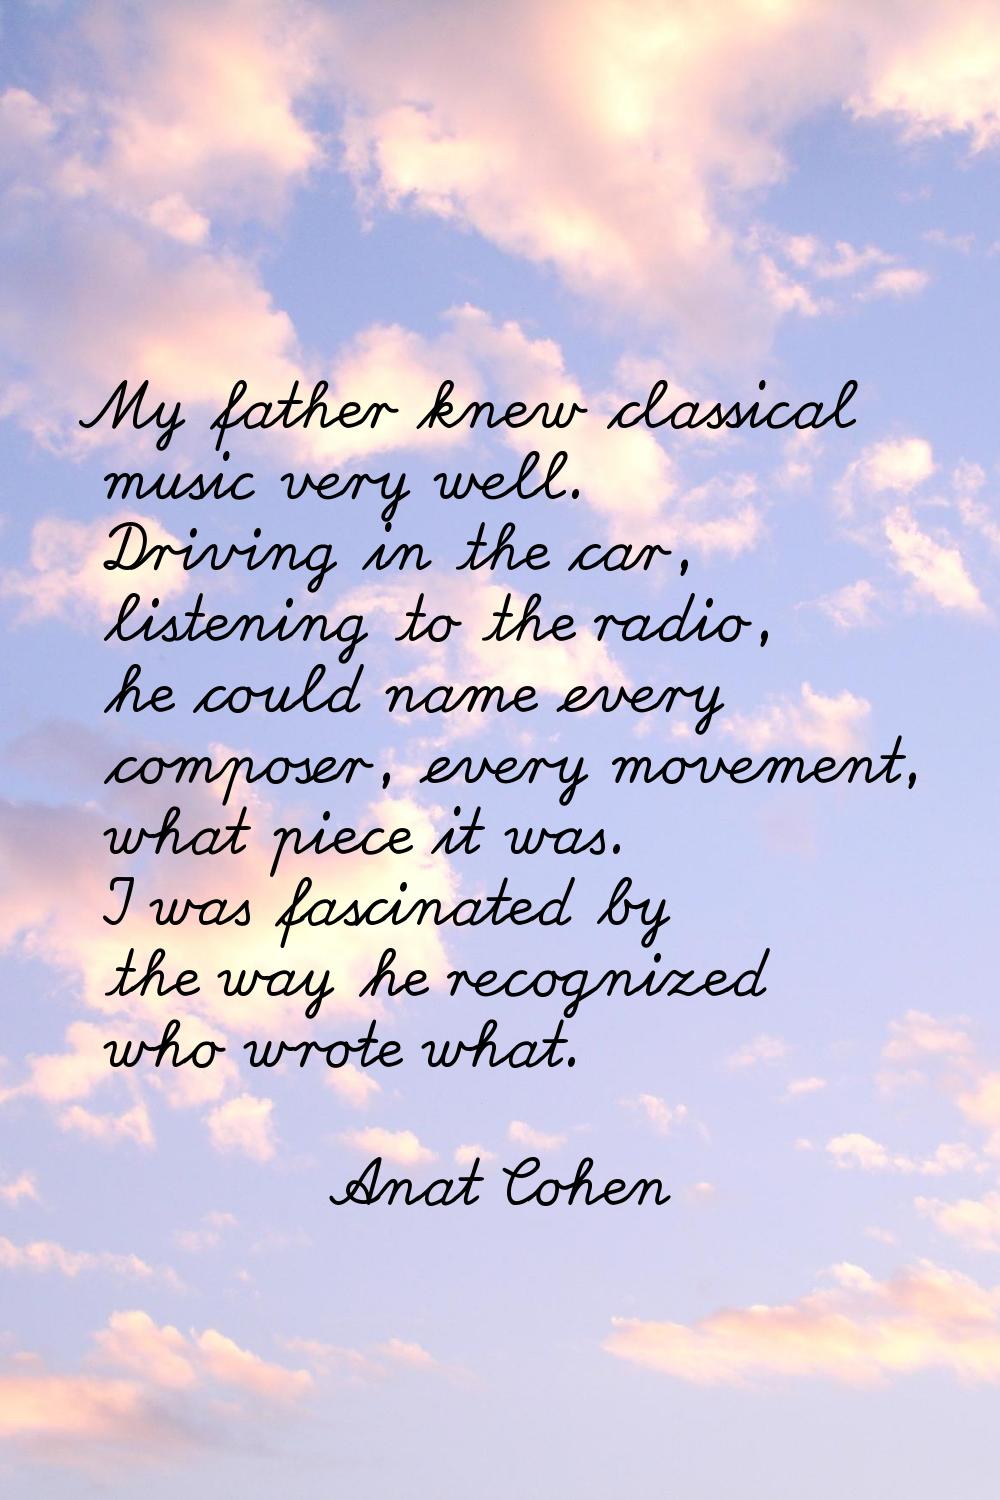 My father knew classical music very well. Driving in the car, listening to the radio, he could name